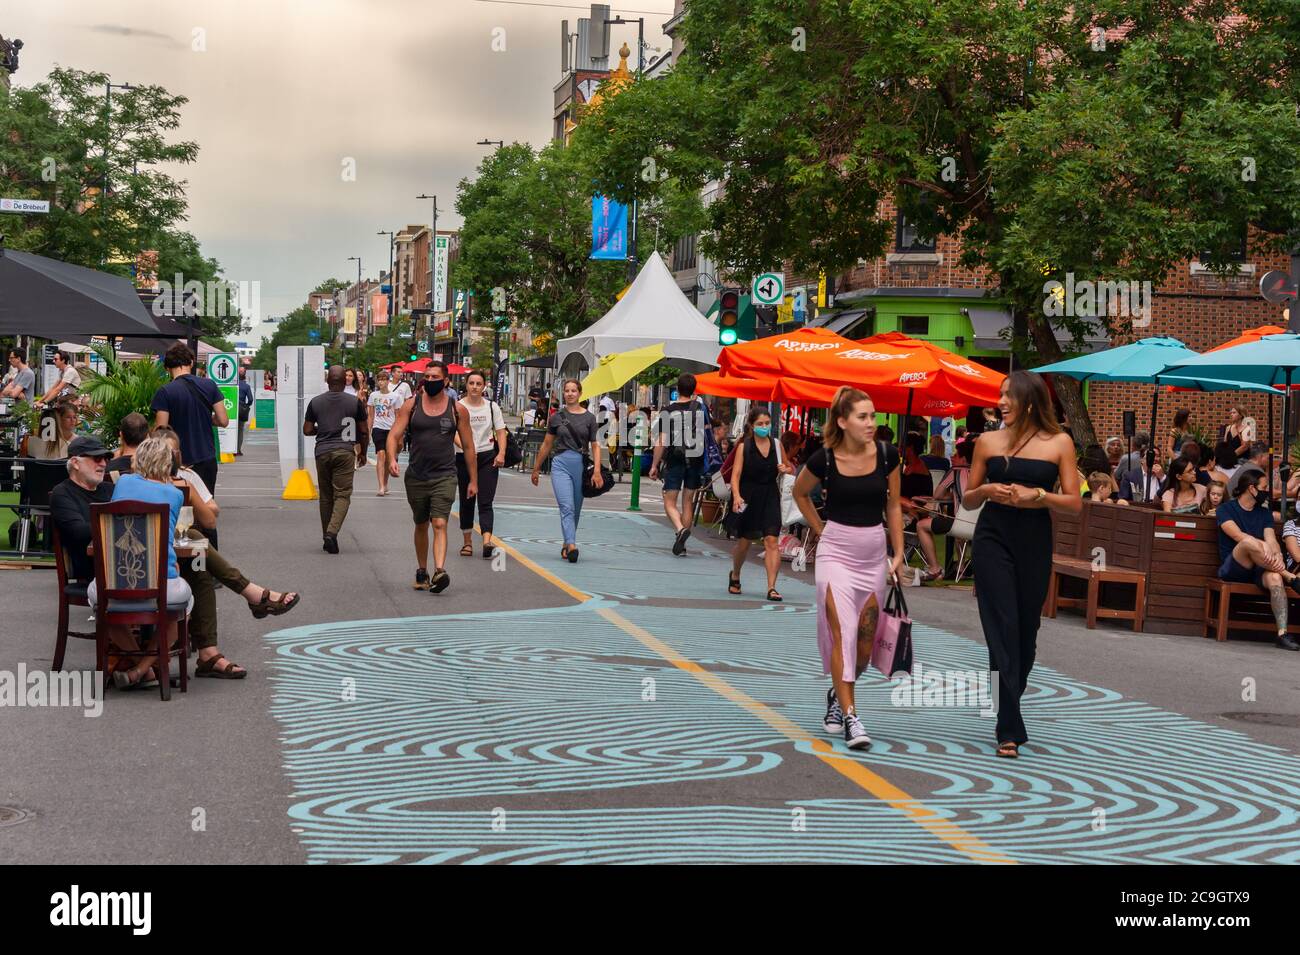 Montreal, CA - 30 July 2020: Voies actives securitaires (safe active transportation circuit) on Mont Royal Avenue during Covid-19 pandemic Stock Photo